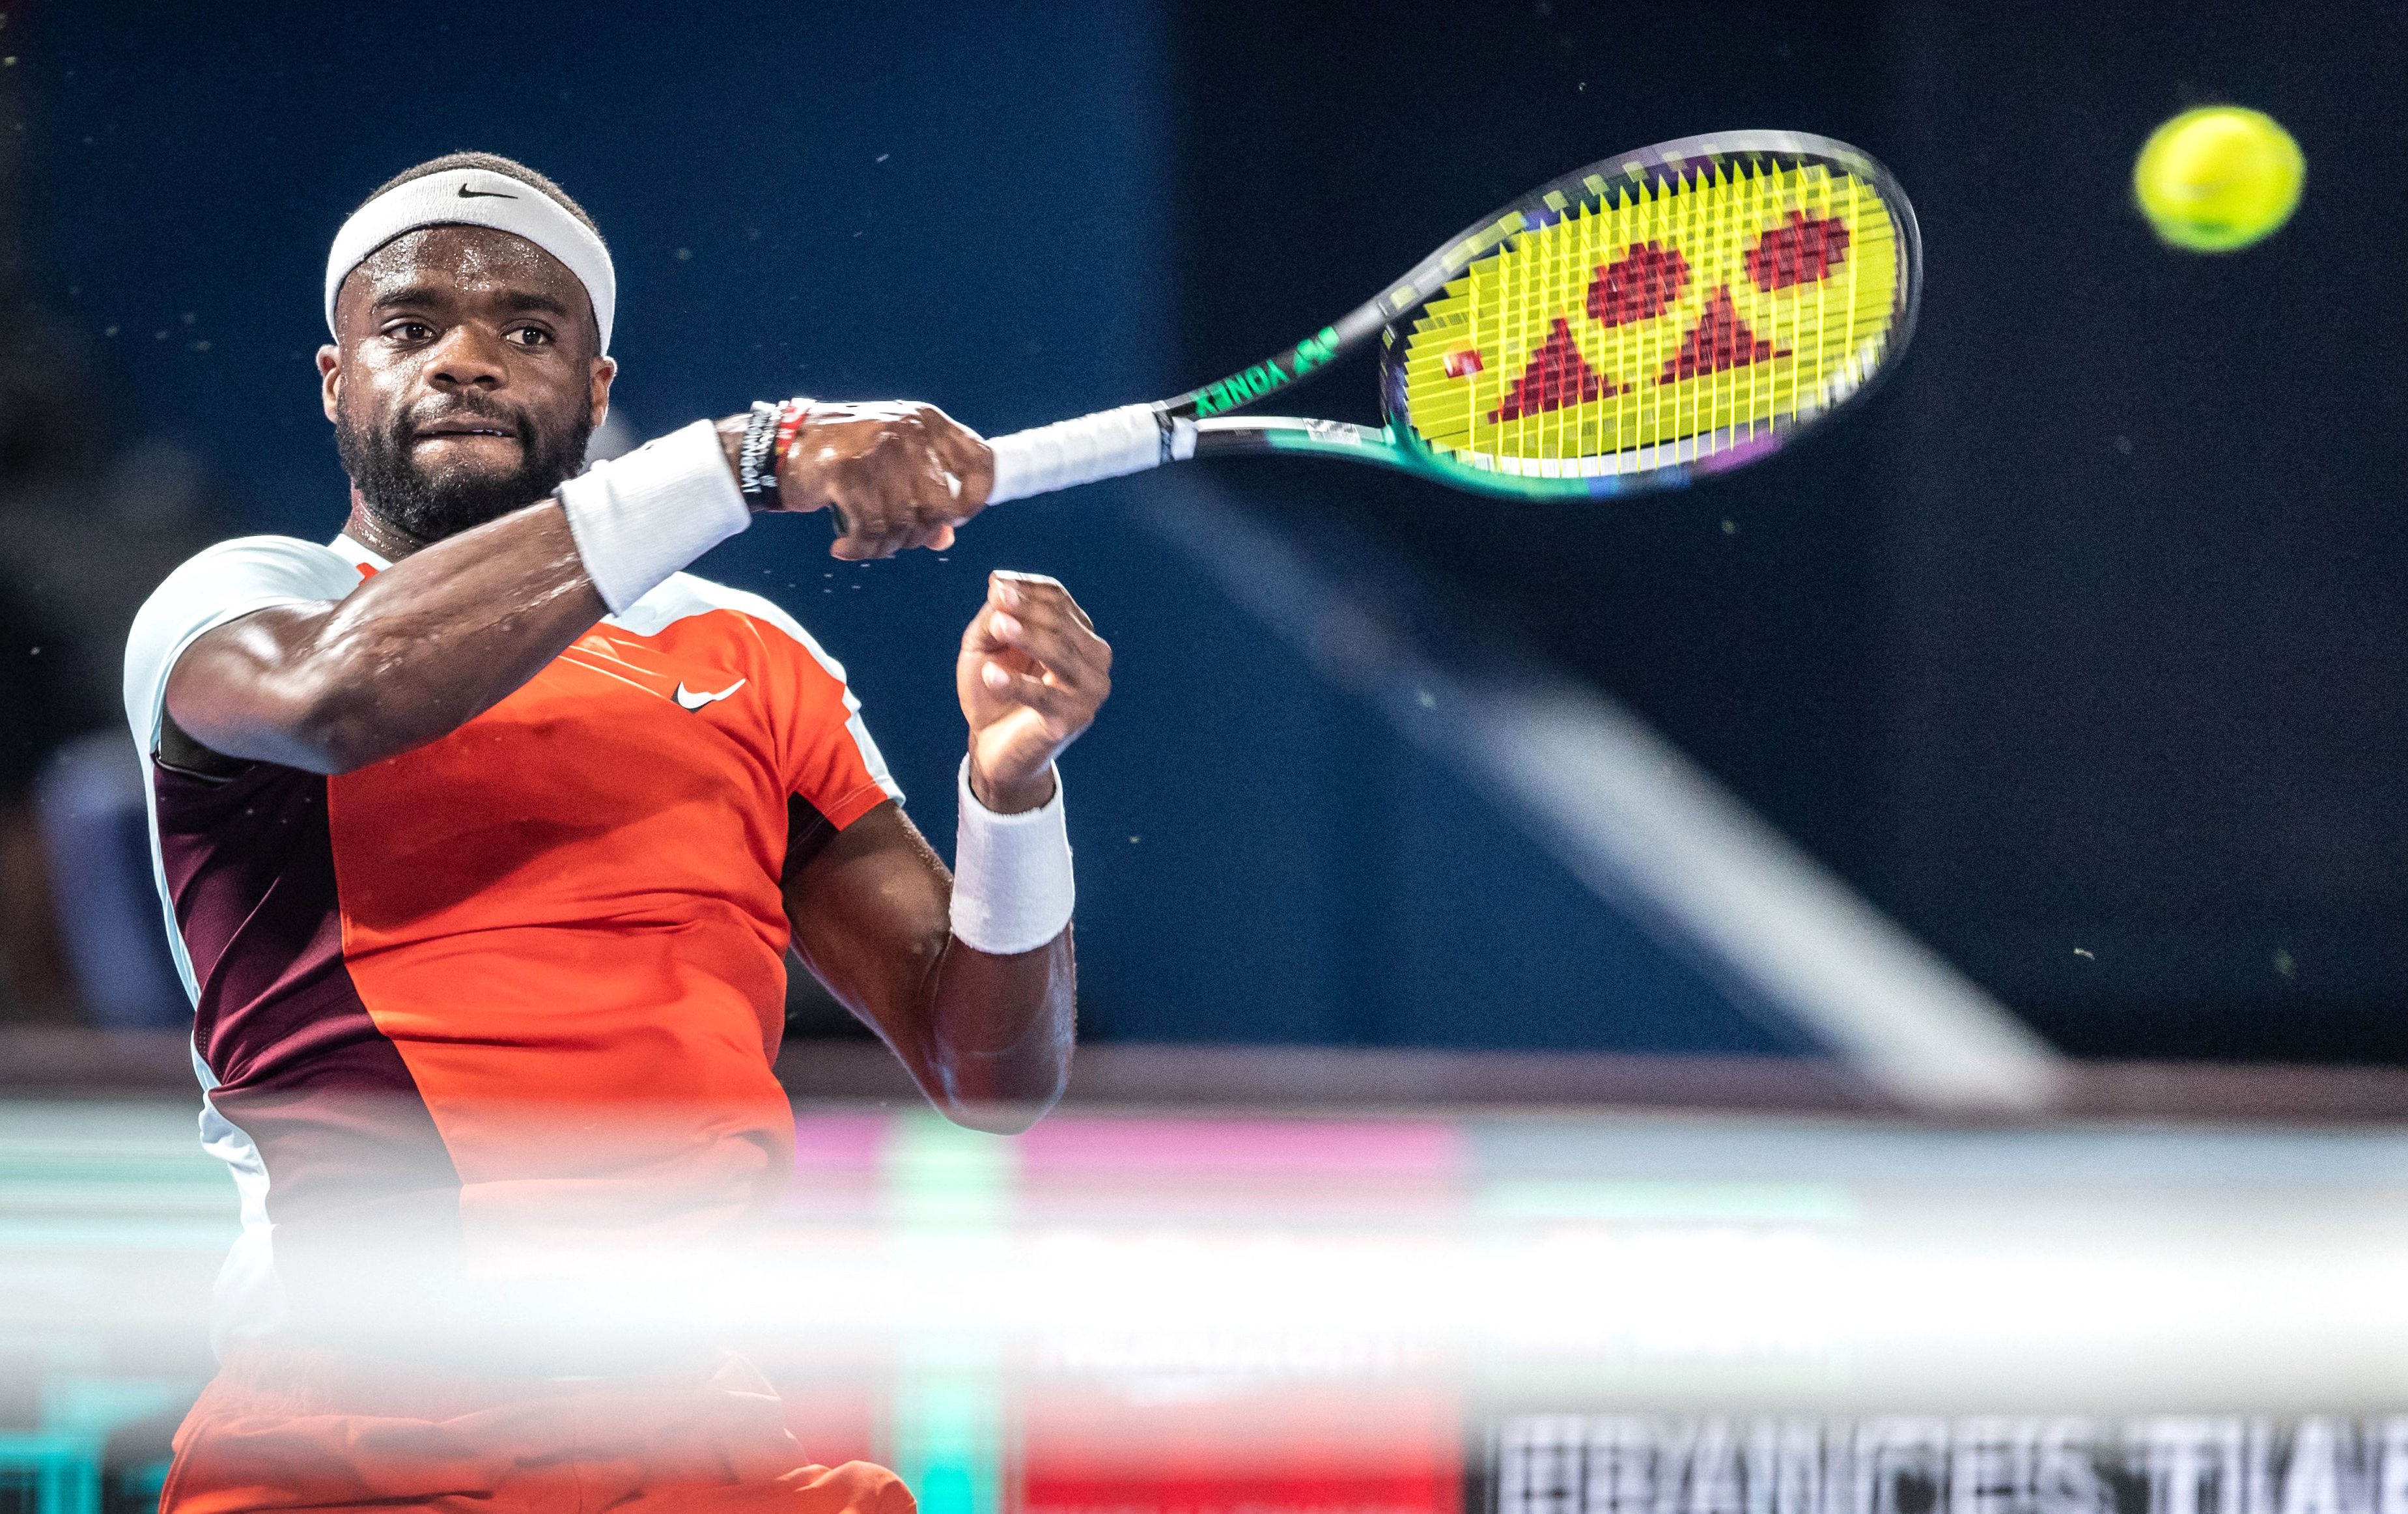 Stat of the Day Frances Tiafoe rallies from 6-3, 4-0 down for 100th hard-court win of career in Stockholm